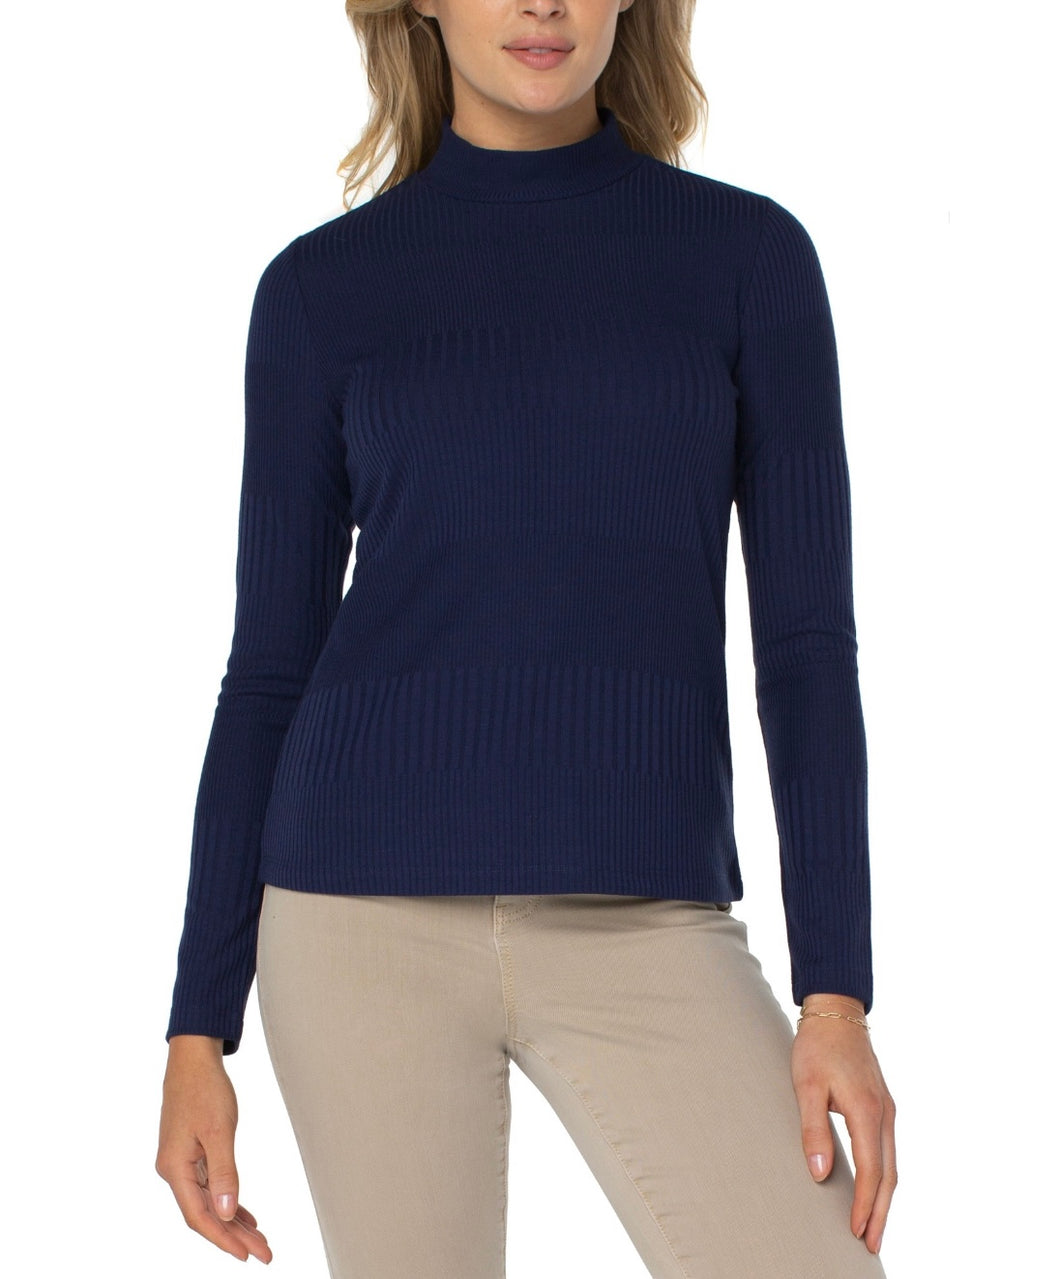 Liverpool: Mock Neck Long Sleeve Rib Knit Top in Peacoat